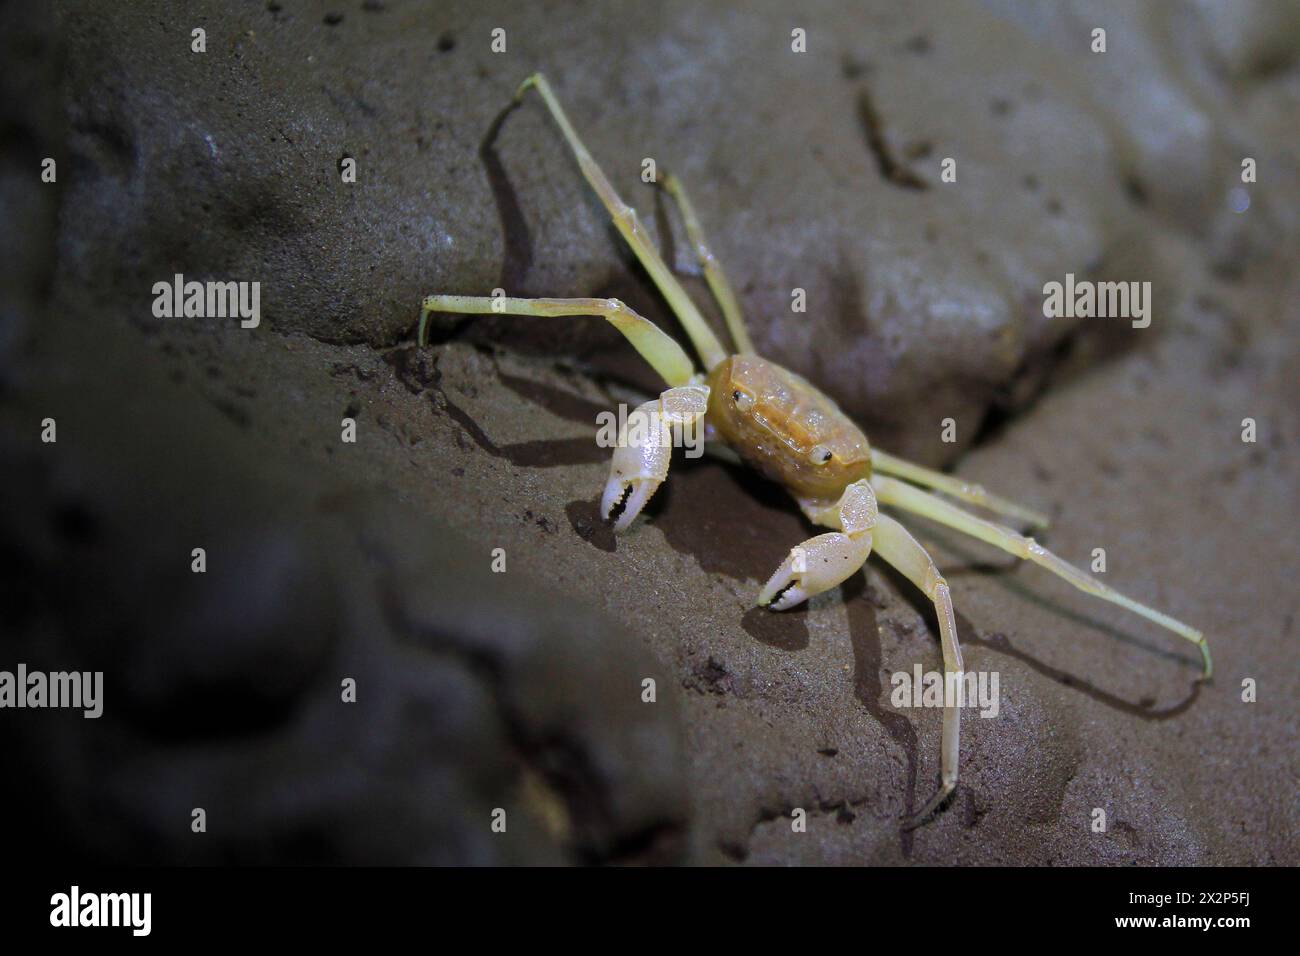 Sesamoides Jacobsoni, a cave biota that lives in the Karst area of Gunung Sewu. This type of crab was first discovered by Edward Jacobson in 1911. Stock Photo